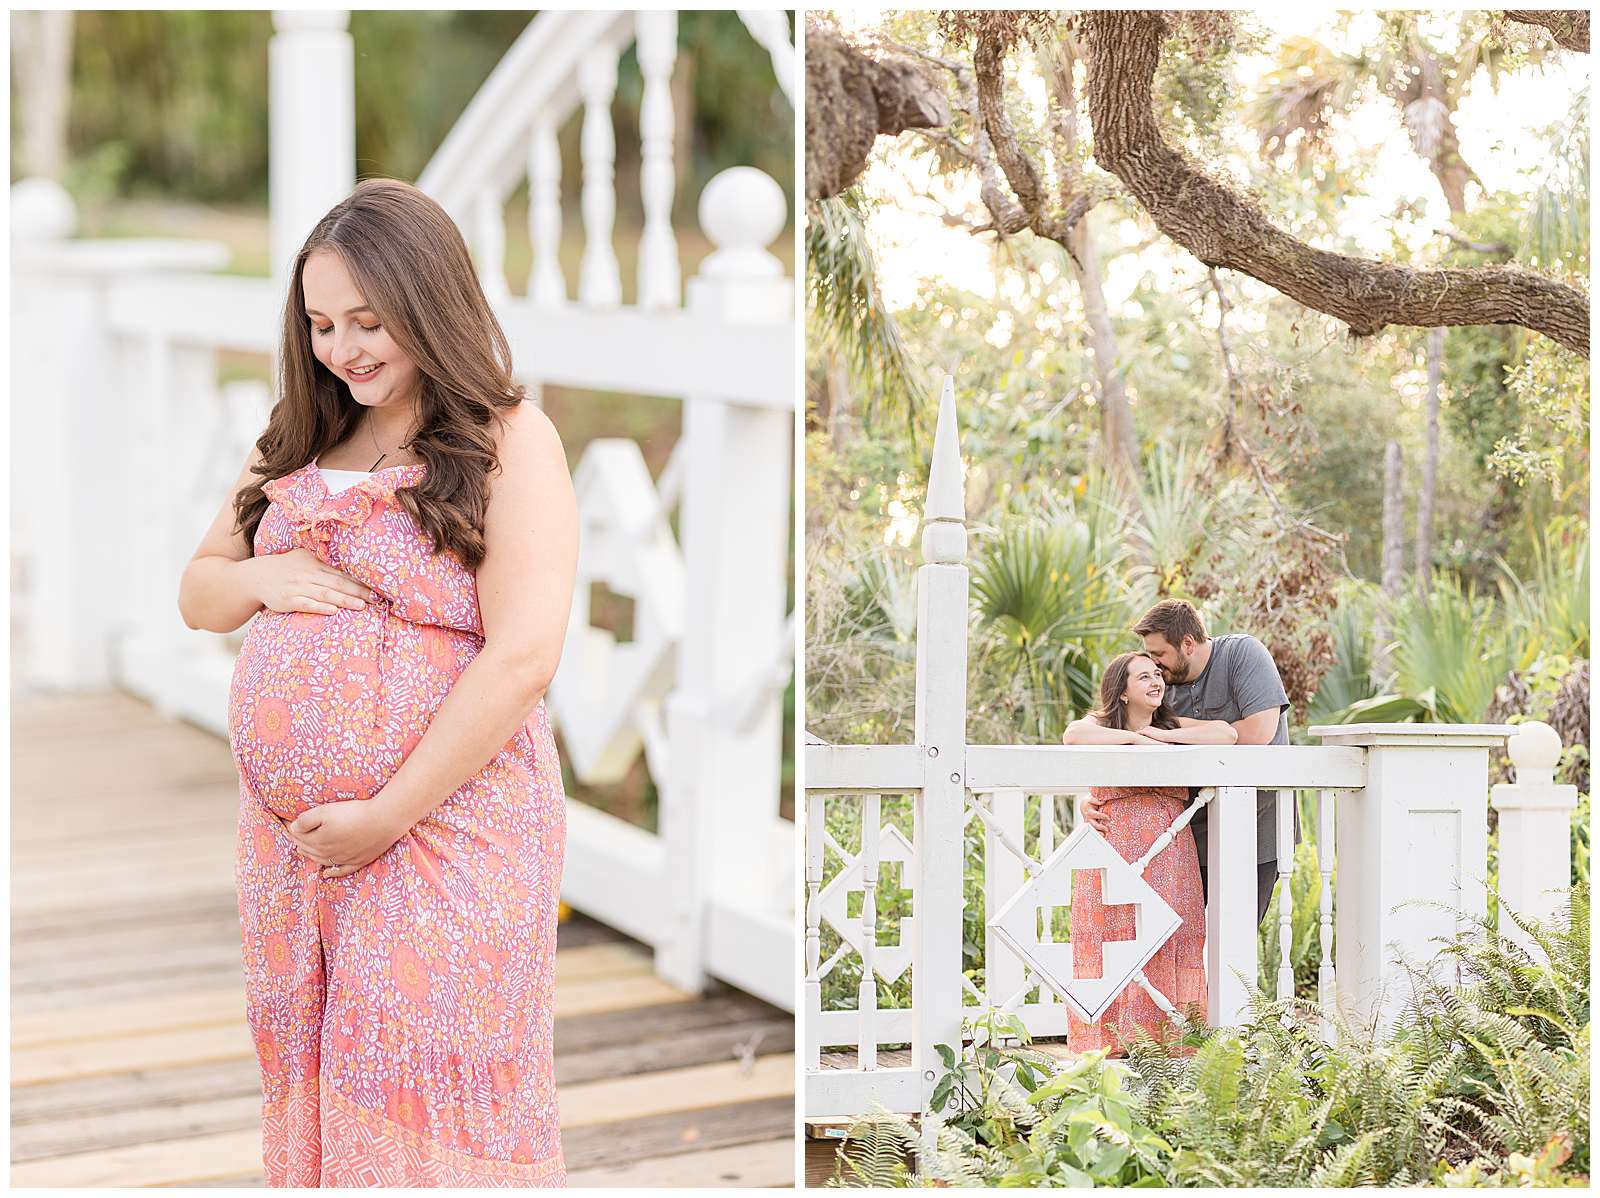 A foot and a half difference between an expecting couple is captured by Rebecca Rice Photography for her Behind the Lens membership.  Pregnant momma wears a designed dress of peach, orange, and pink tons and holds her belly.  The couple stands on a bridge and shares an intimate, happy moment together during their Florida maternity session.